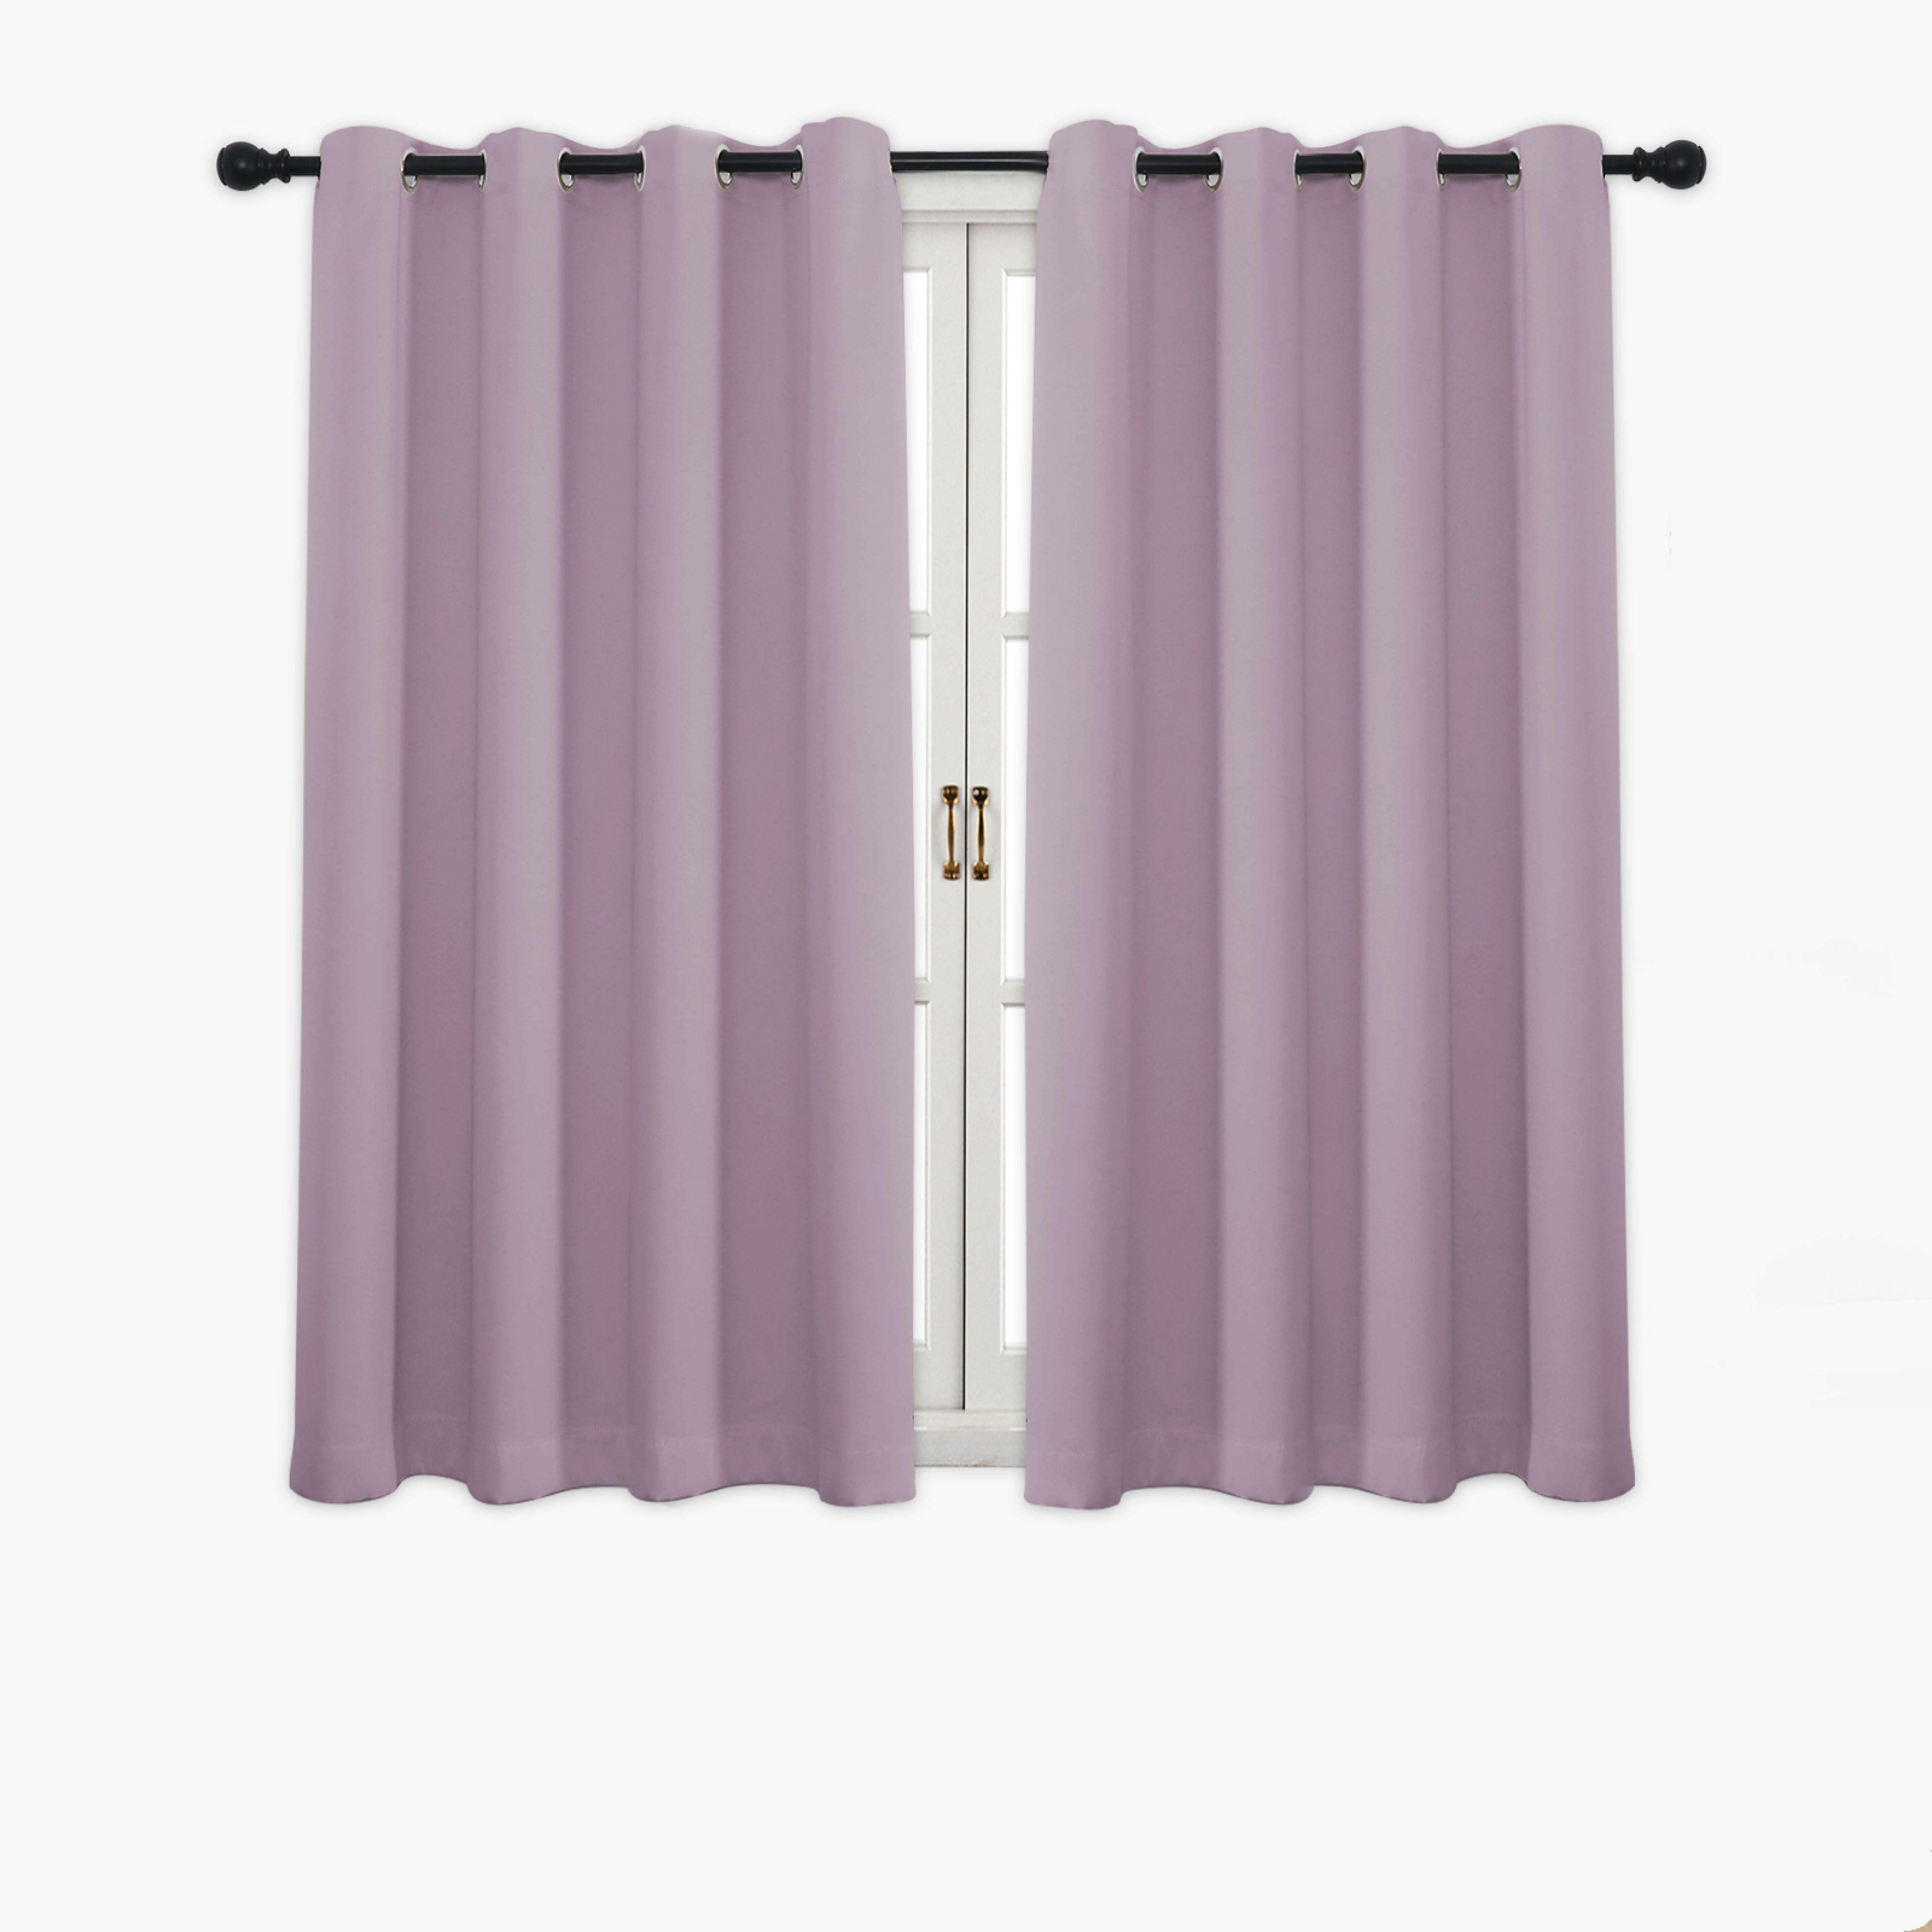 Hyper Cover 3-Layers Blockout Curtains Mauve | Window Curtains | Brilliant Home Living